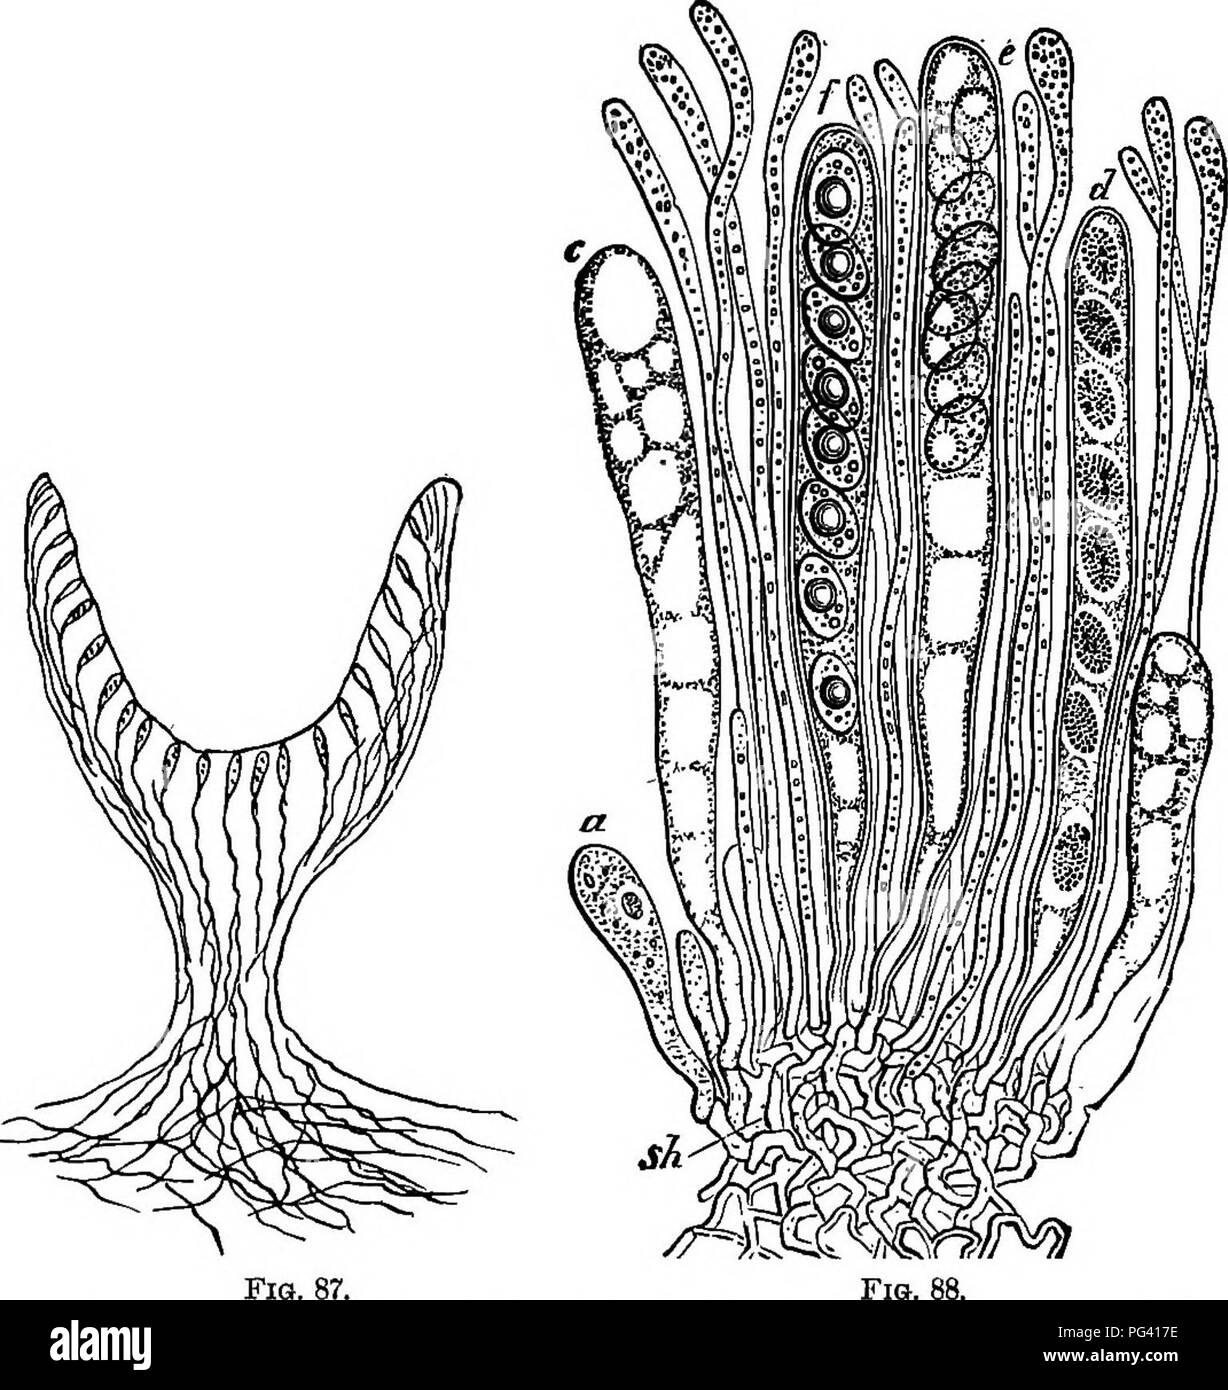 . The essentials of botany. Botany. 162 BOTANY. the size and form of tie spore-fruit. Some of the filaments of the spore-fruit become enlarged into sacs in which spores are developed (Fig. 88), while the others make up the sterile. Fio. 87. Fig. 87.—Diagrammatic vertical section of a Cup-fungus, sliowing position of the spore-sacs. Fig. 88.—a few spore-sacs of a Cup-fungus (Peziza convexula), in various stages of development, a, youngest, to/, oldest. The slender filaments (paraphyses) belong to the sterile tissue. Magnified 550 times. or protective tissue. The spore-sacs grow so that all reac Stock Photo